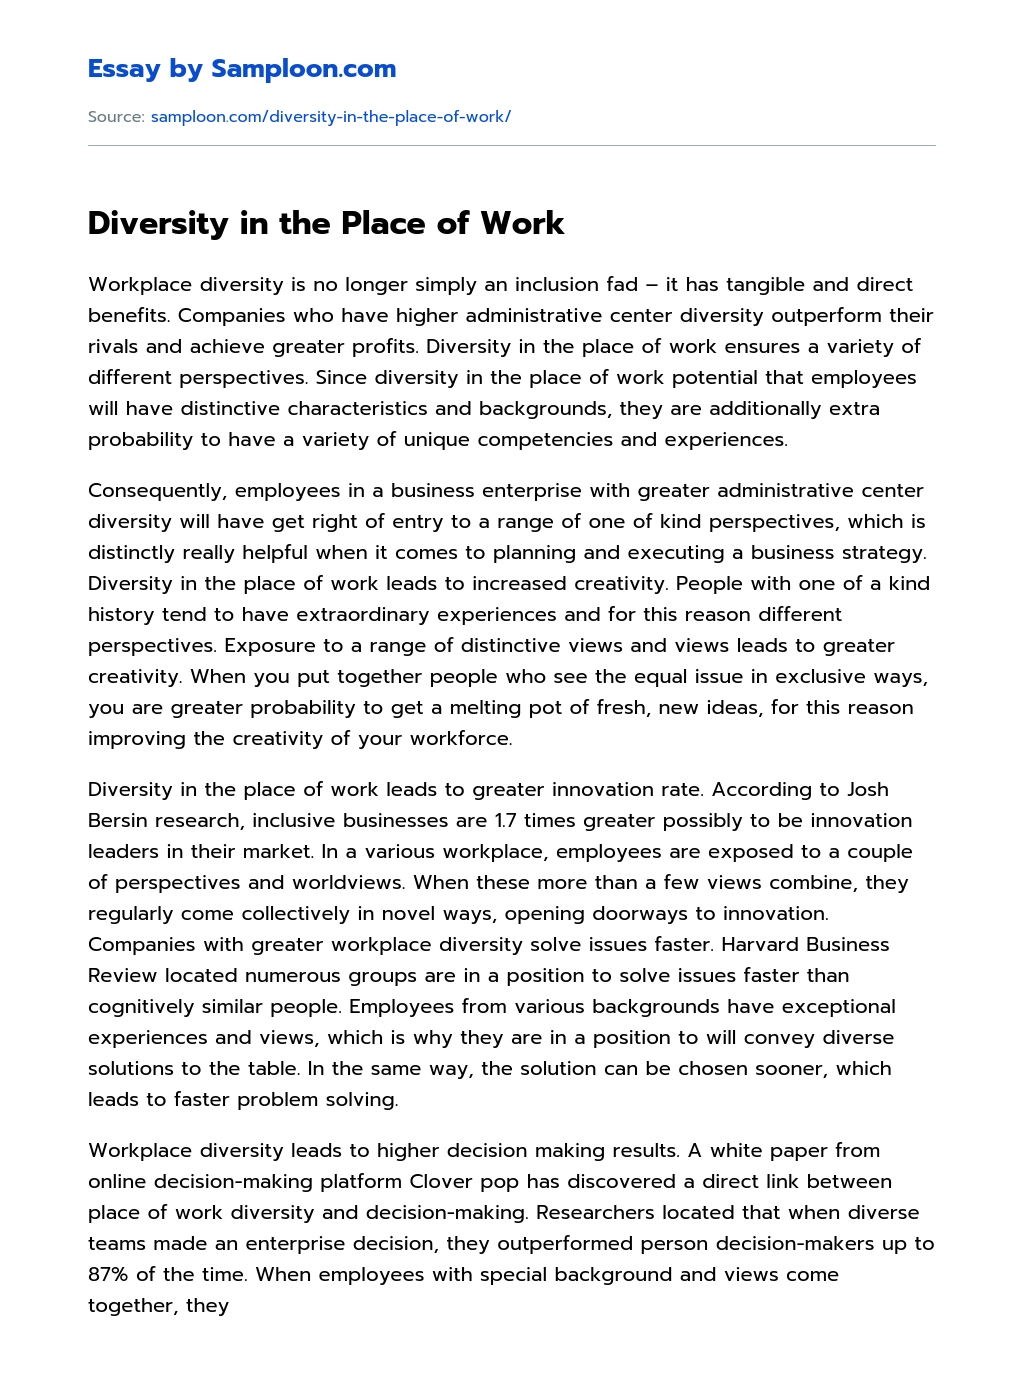 Diversity in the Place of Work essay